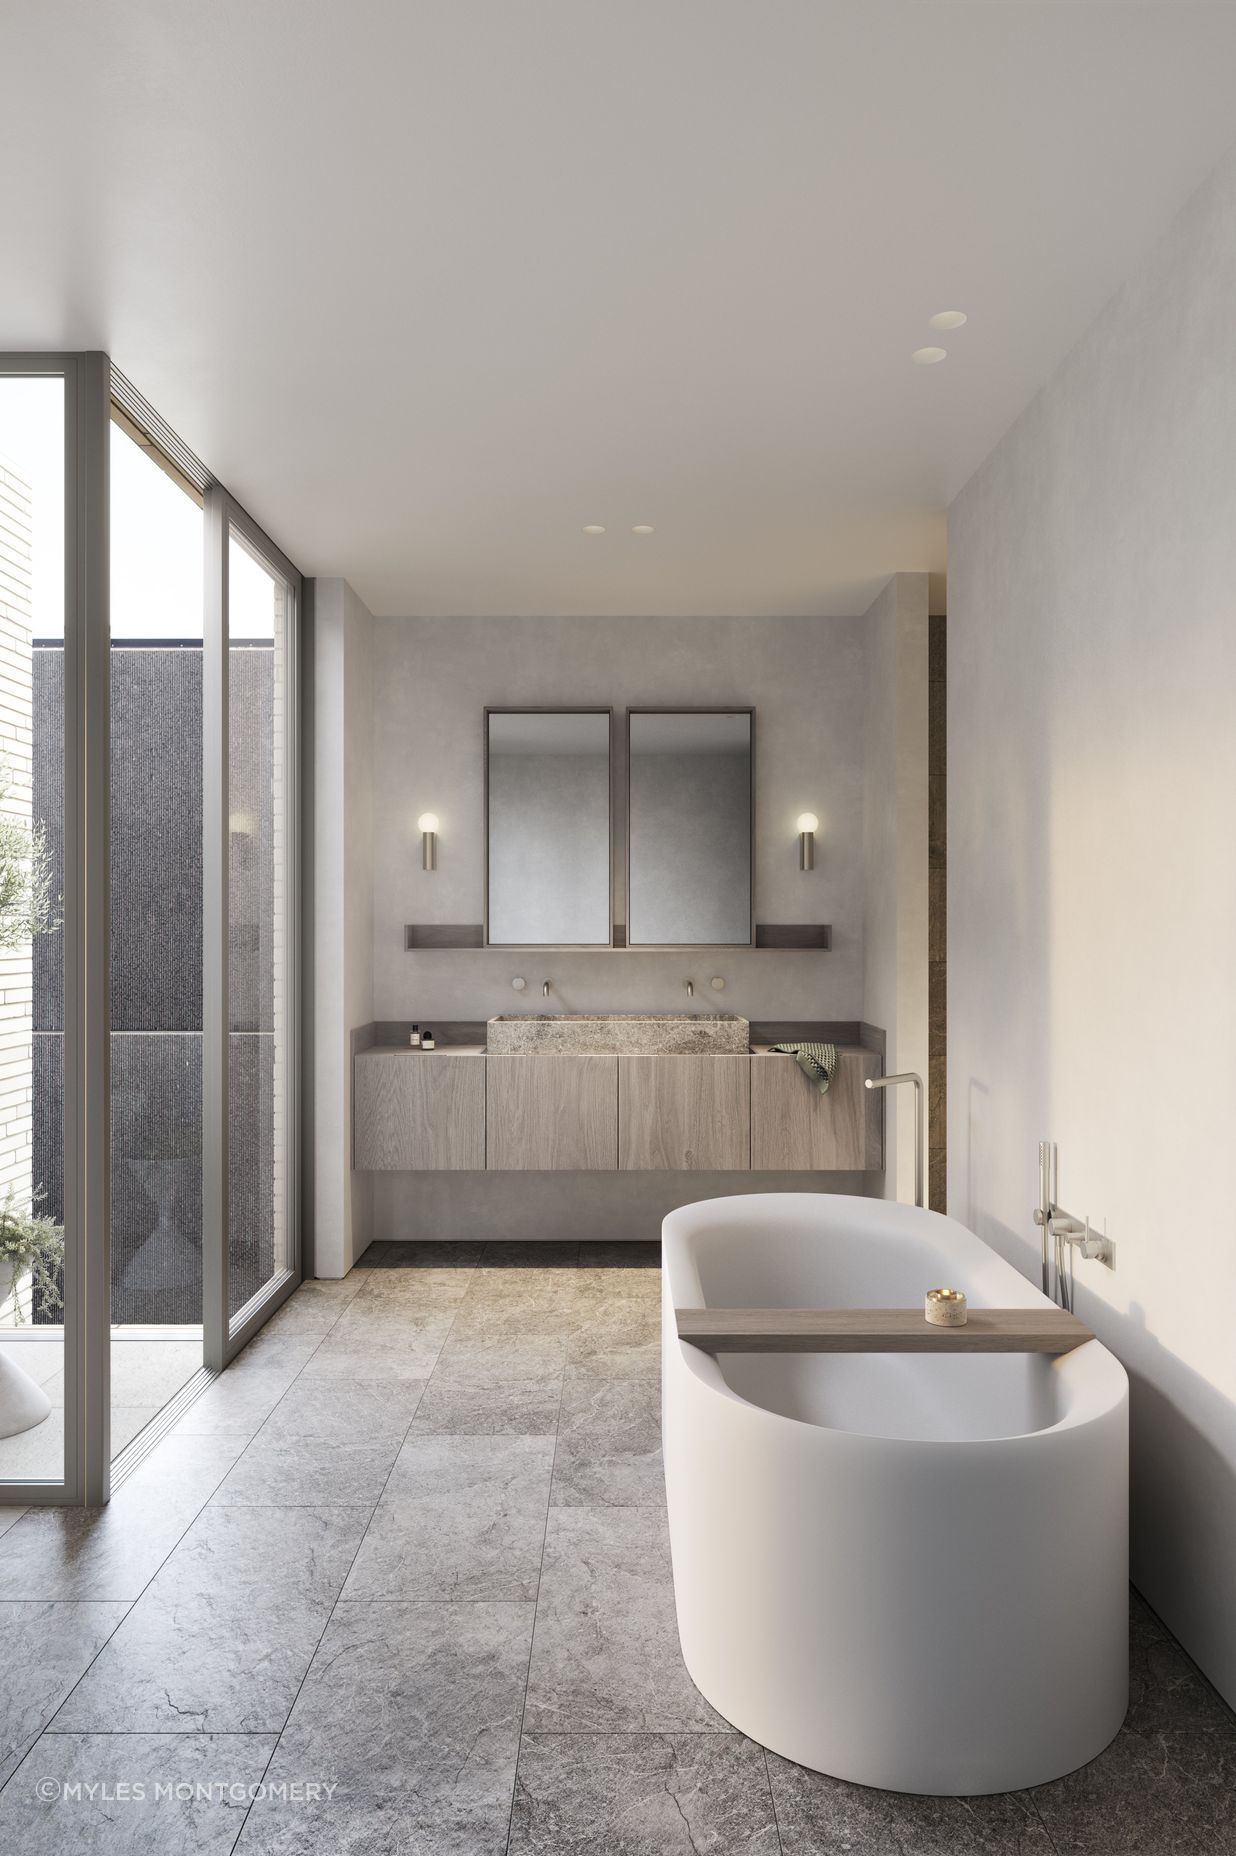 Tumbled marble tiles and carved stone basins imbue bathrooms with an elegant tactility.